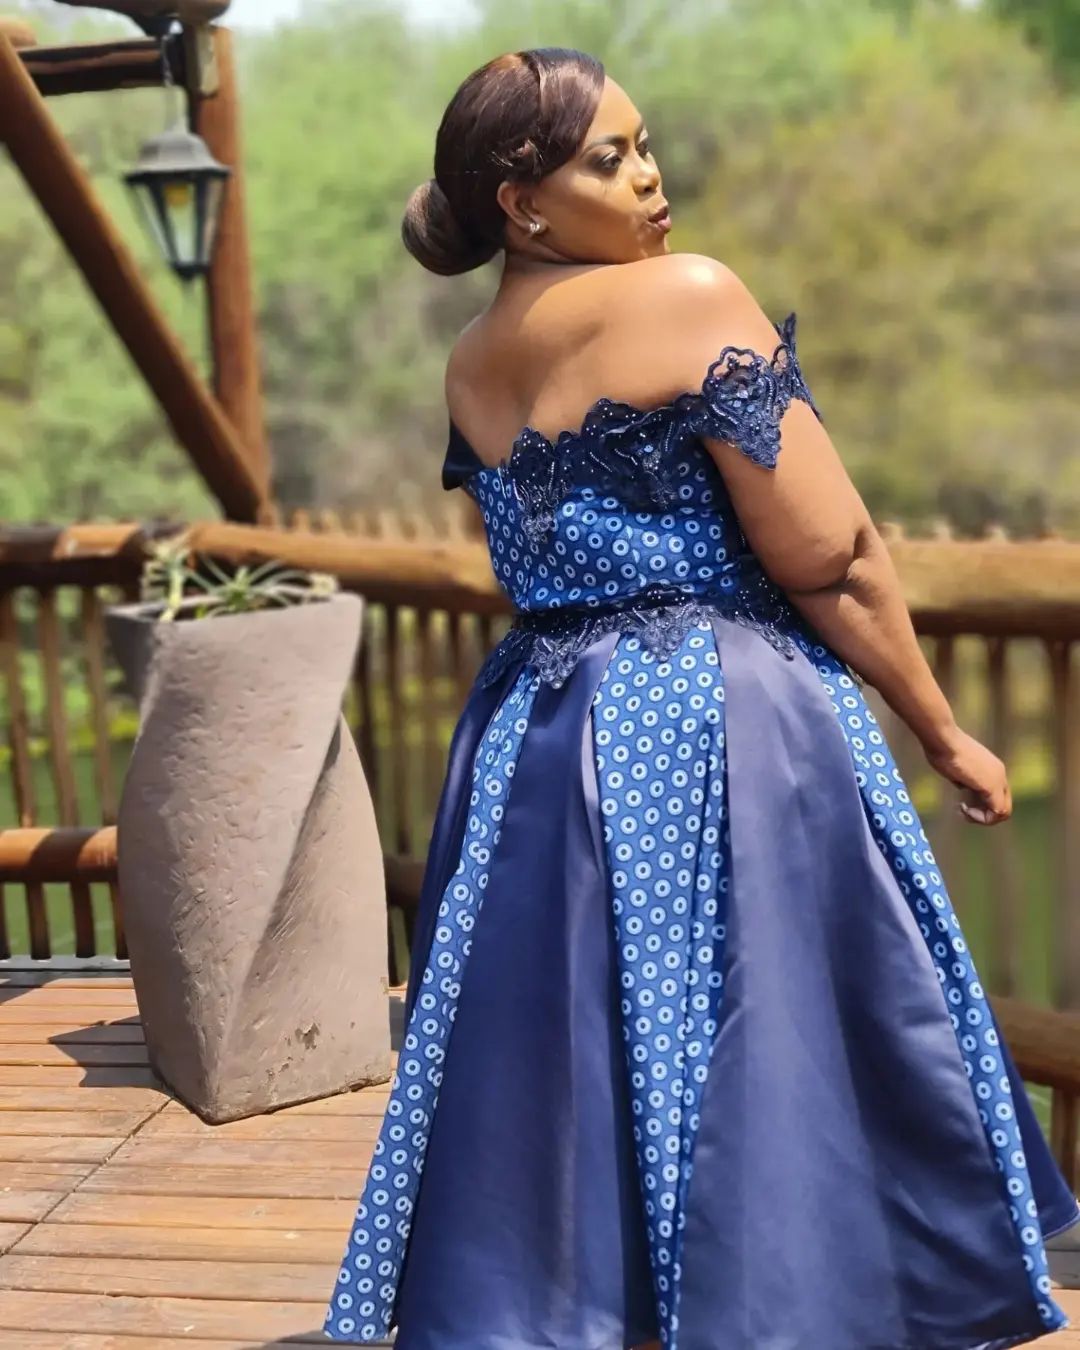 Turning Heads in Tswana Style: Bold and Beautiful Designs 25